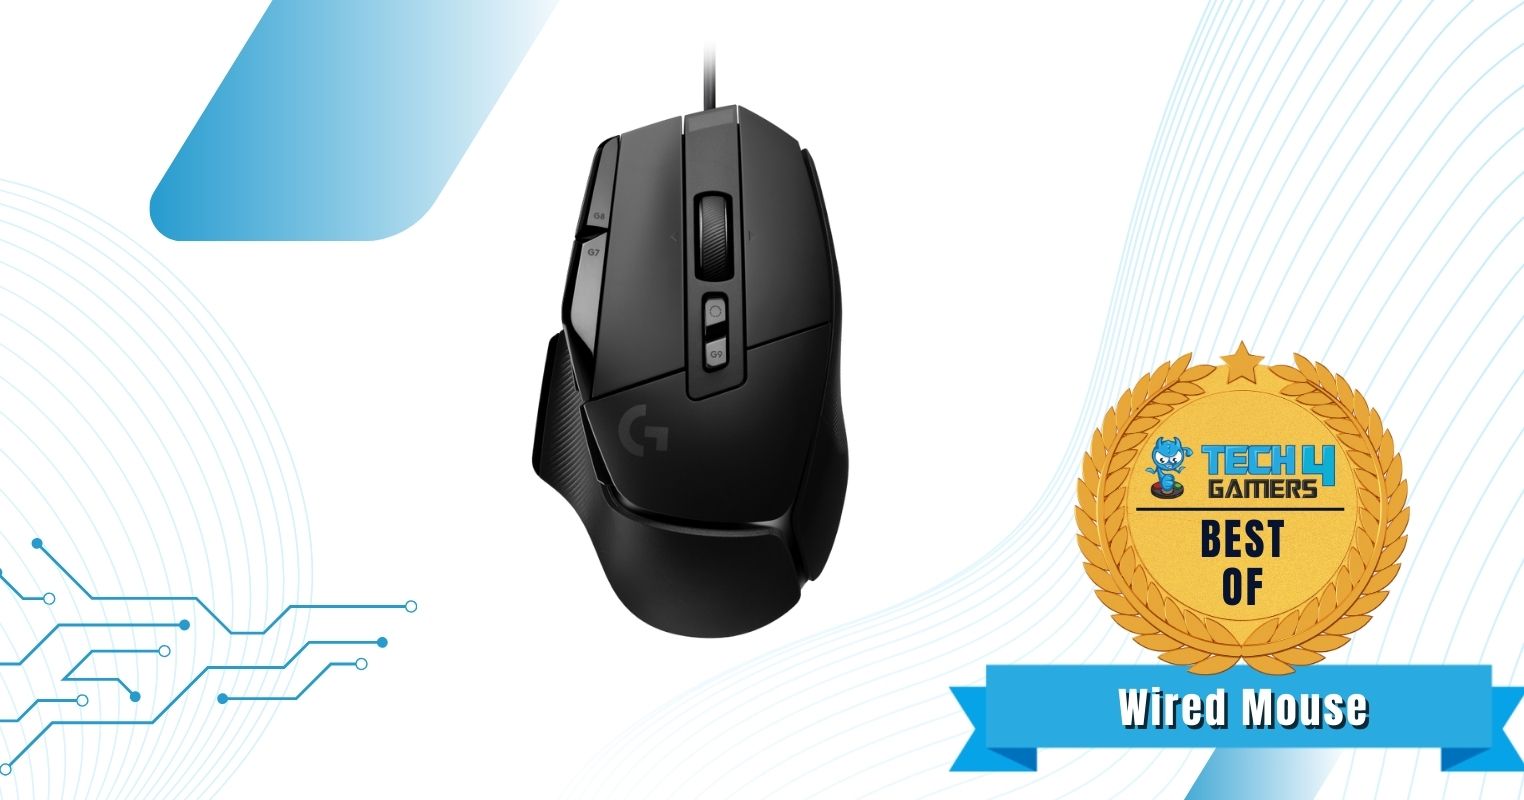 Best Wired Mouse For League of Legends - Logitech G502 X